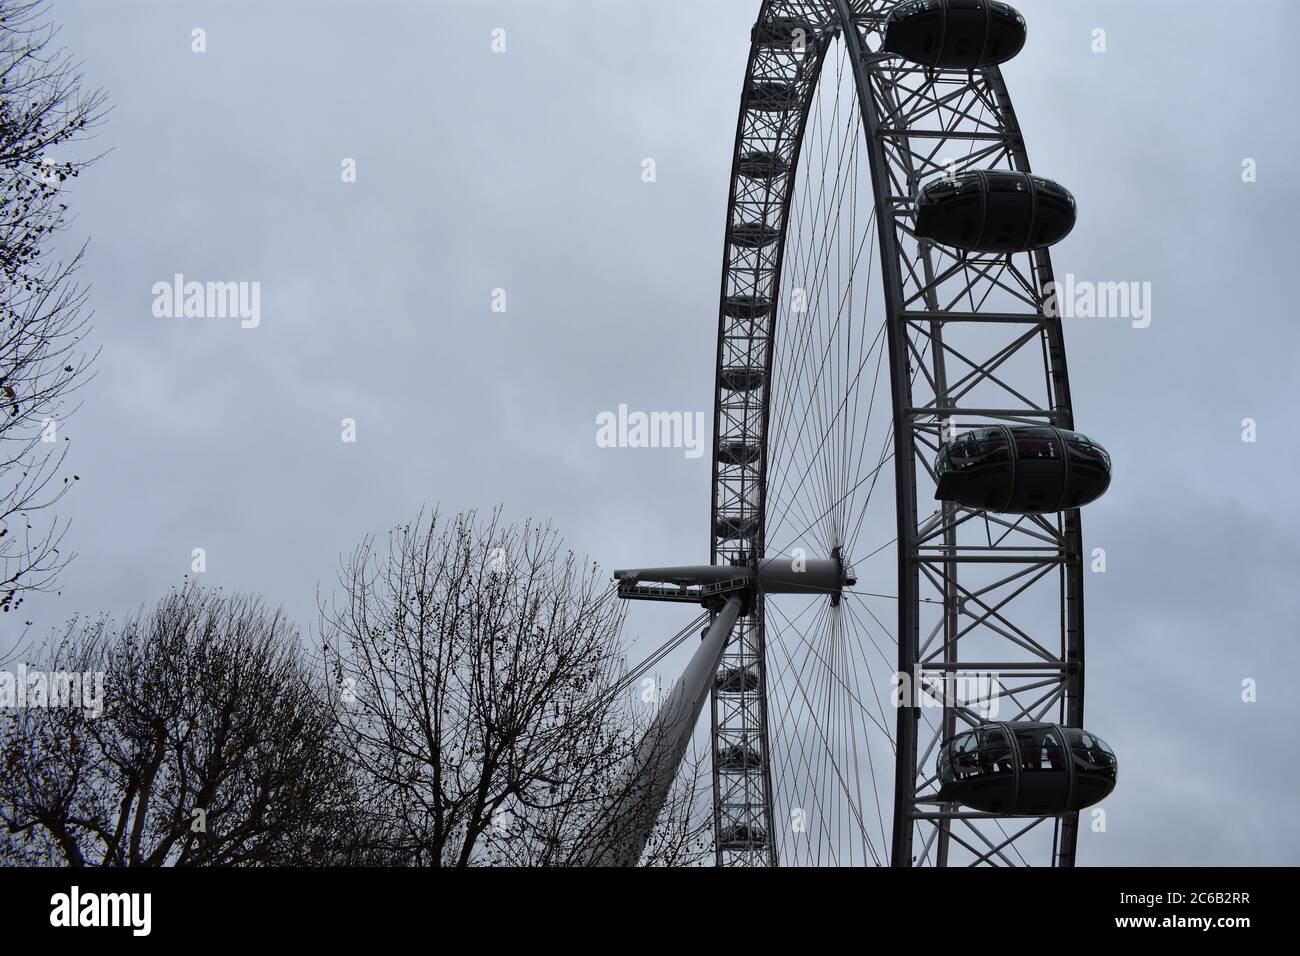 The London Eye. A giant observation wheel on the South Bank.  Part Of the wheel is shown on a cloudy winters day, with trees around the edge of image. Stock Photo